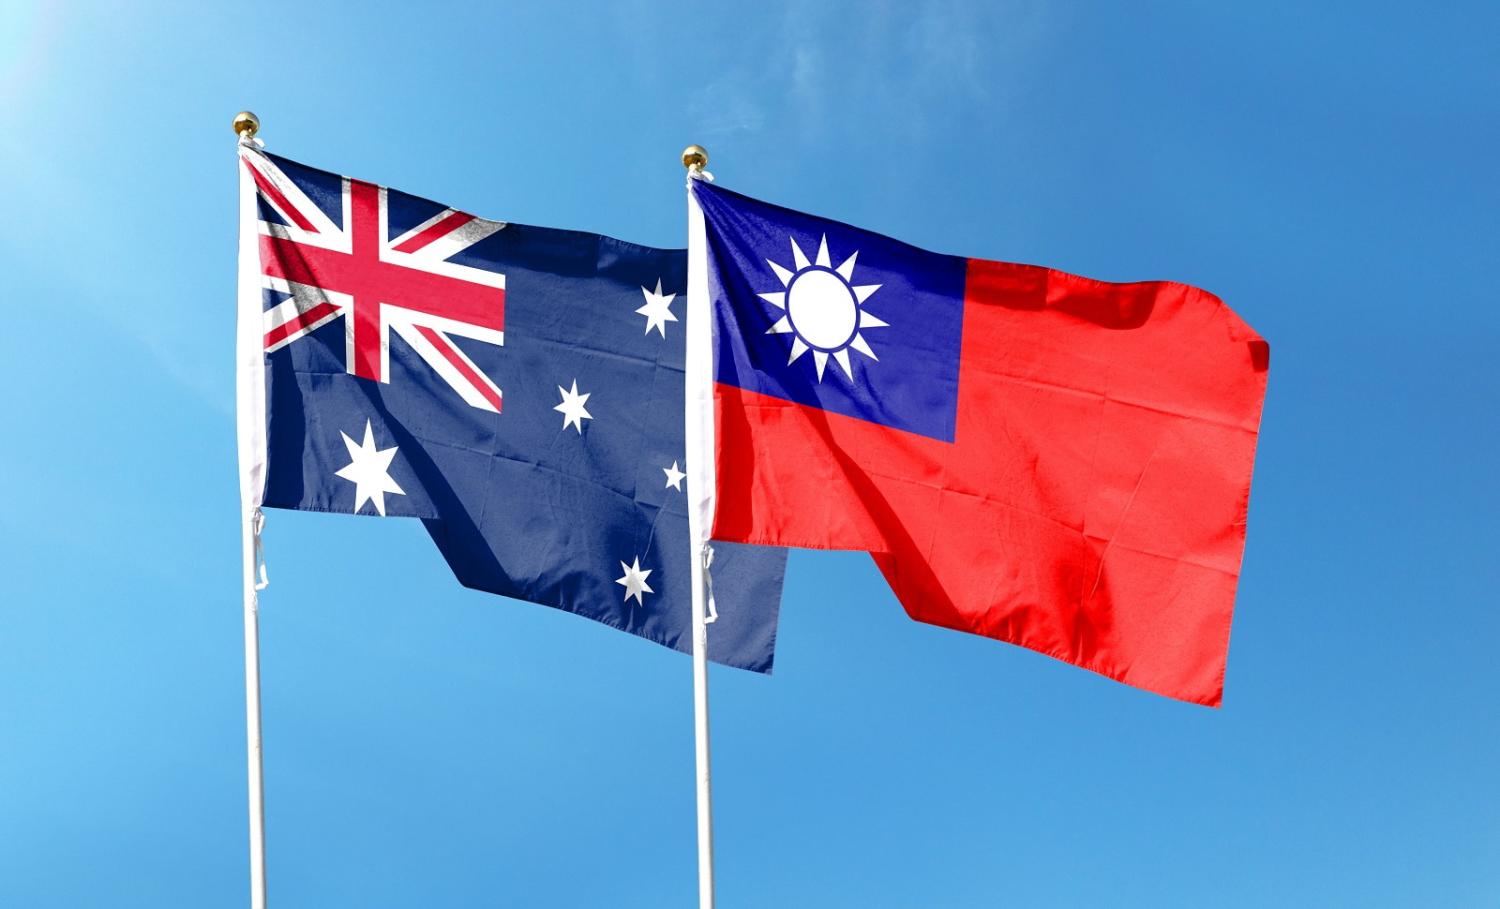 Despite claims to the contrary from China, Australia’s one-China policy doesn’t rule out inking trade agreements with Taiwan or sending ministers to visit Taipei (Getty Images)